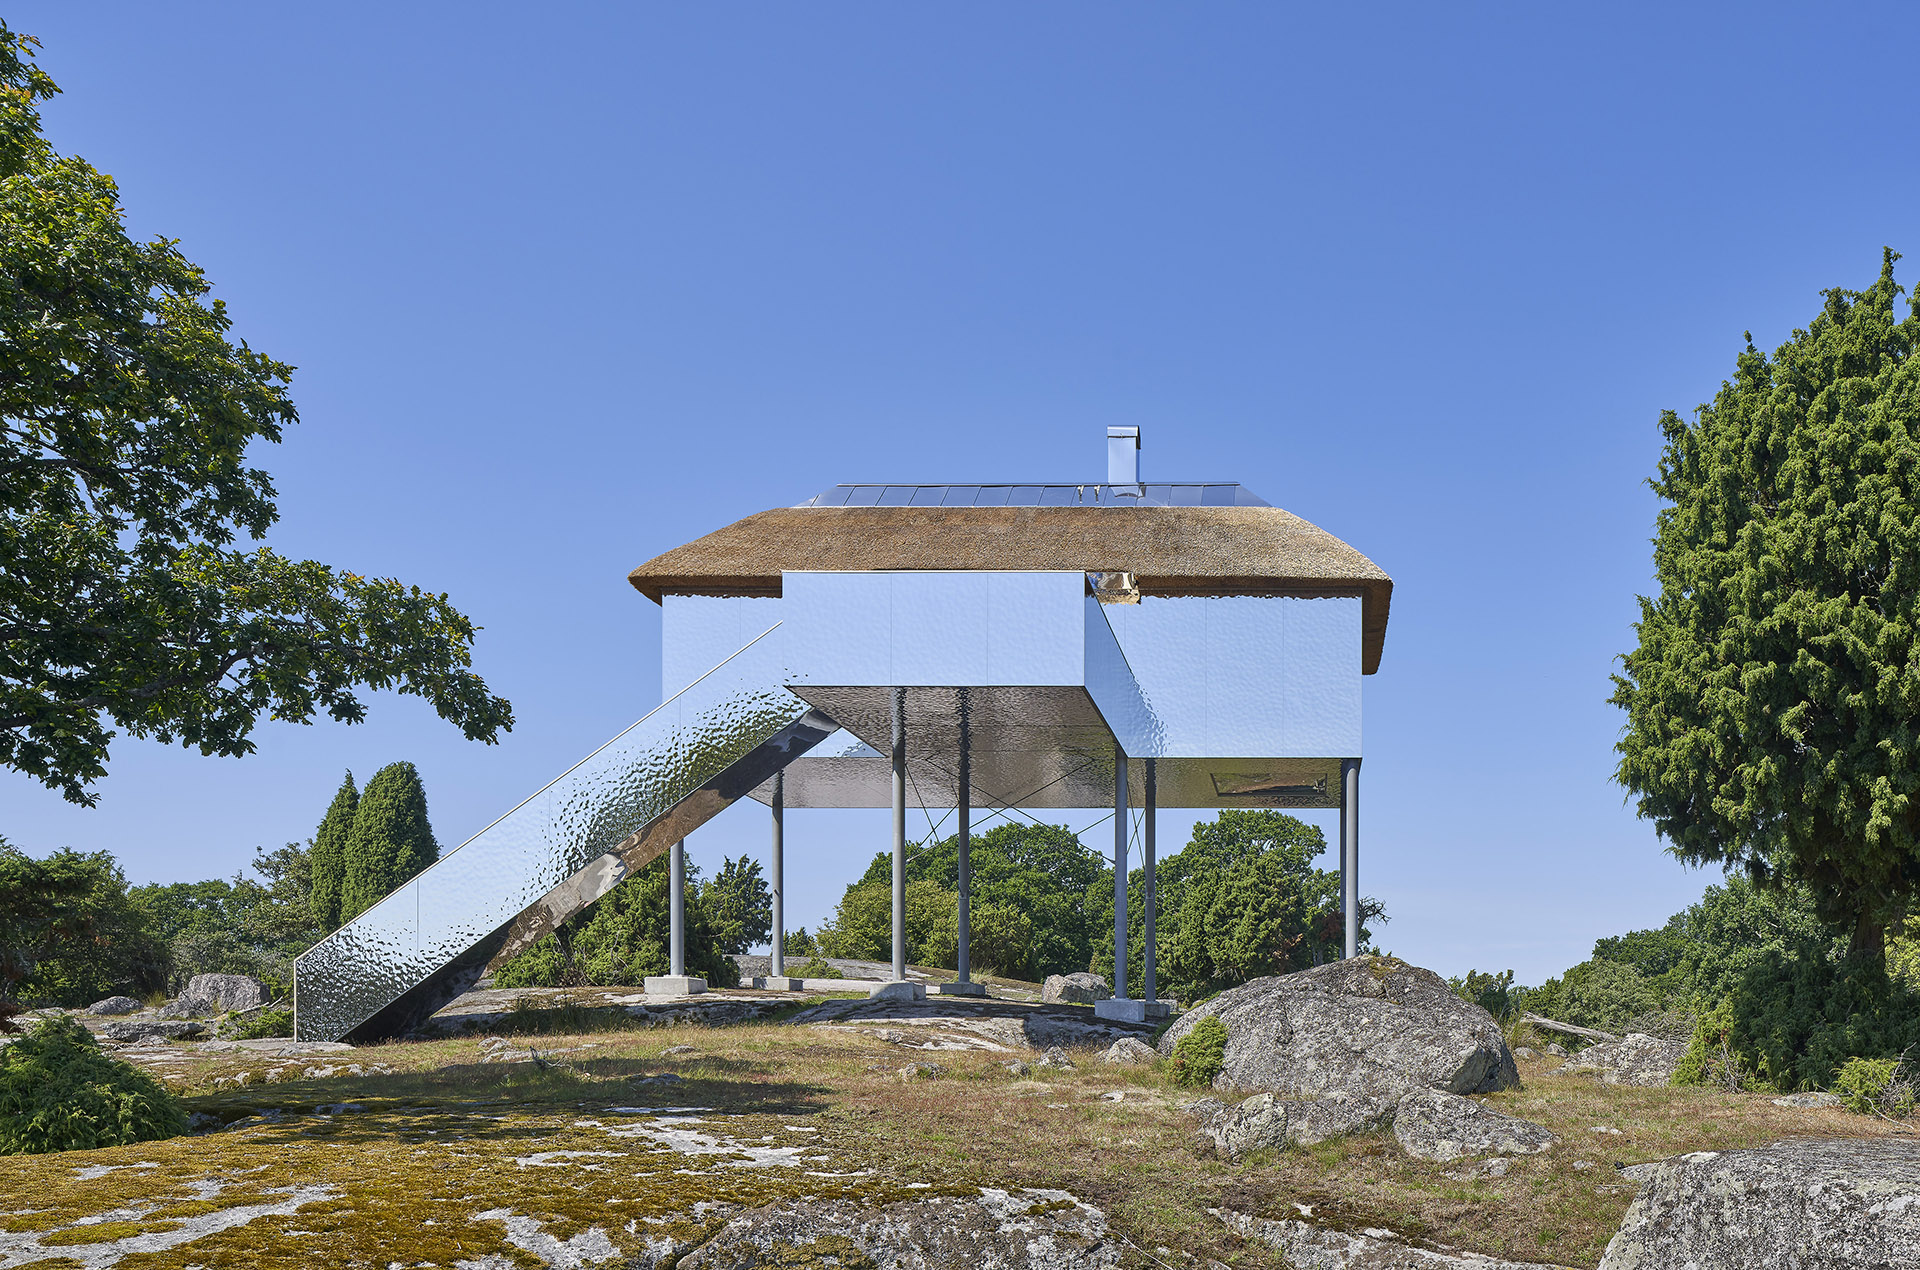 Synvillan, the illusion of a house dissolving in Scandinavian nature